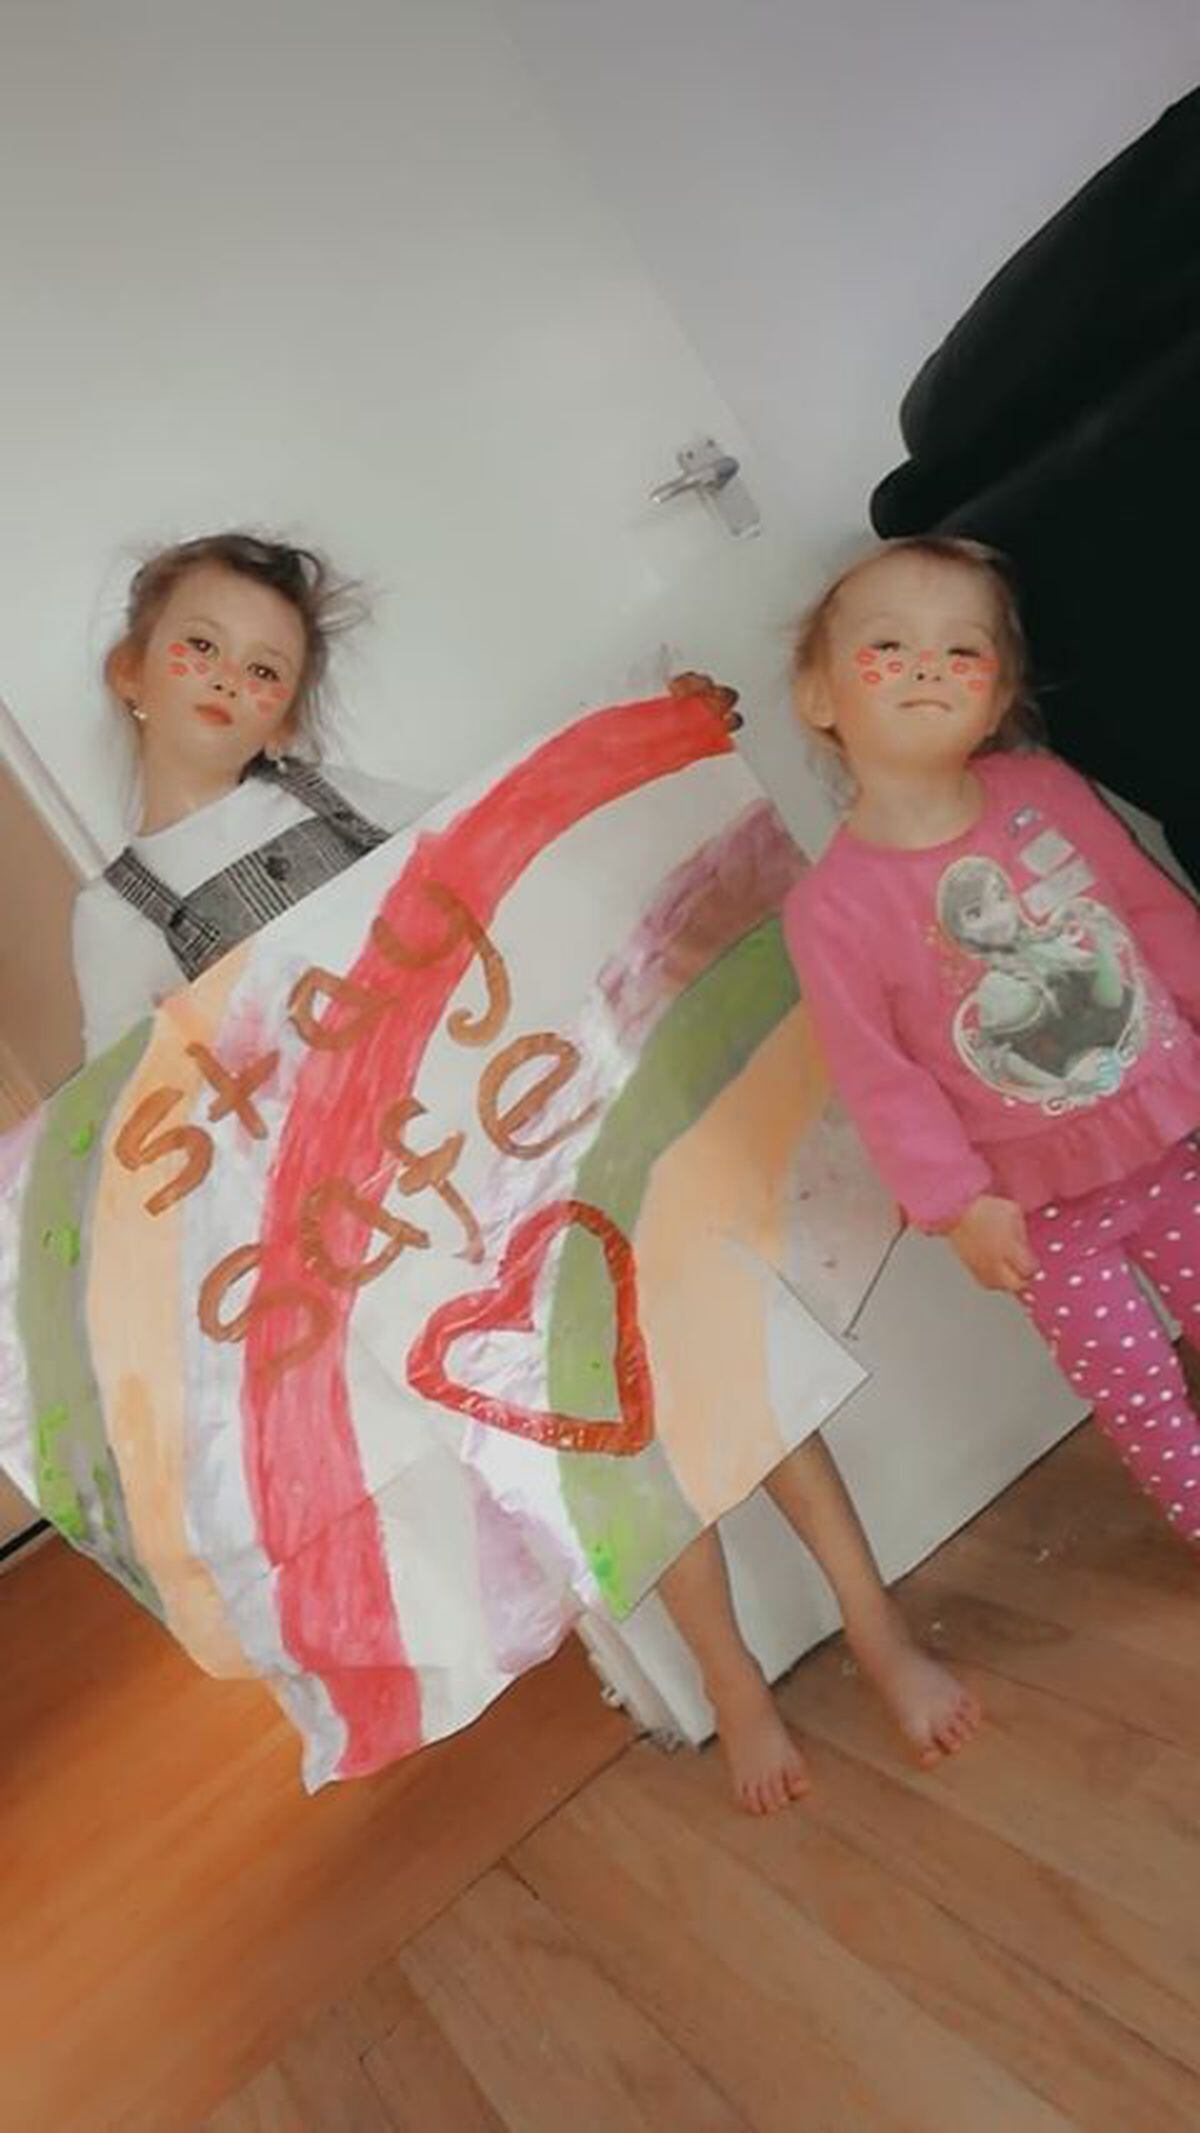 Ella-may Bradley, age 6, and April-Leigh Cheshire, age 2, from Wolverhampton